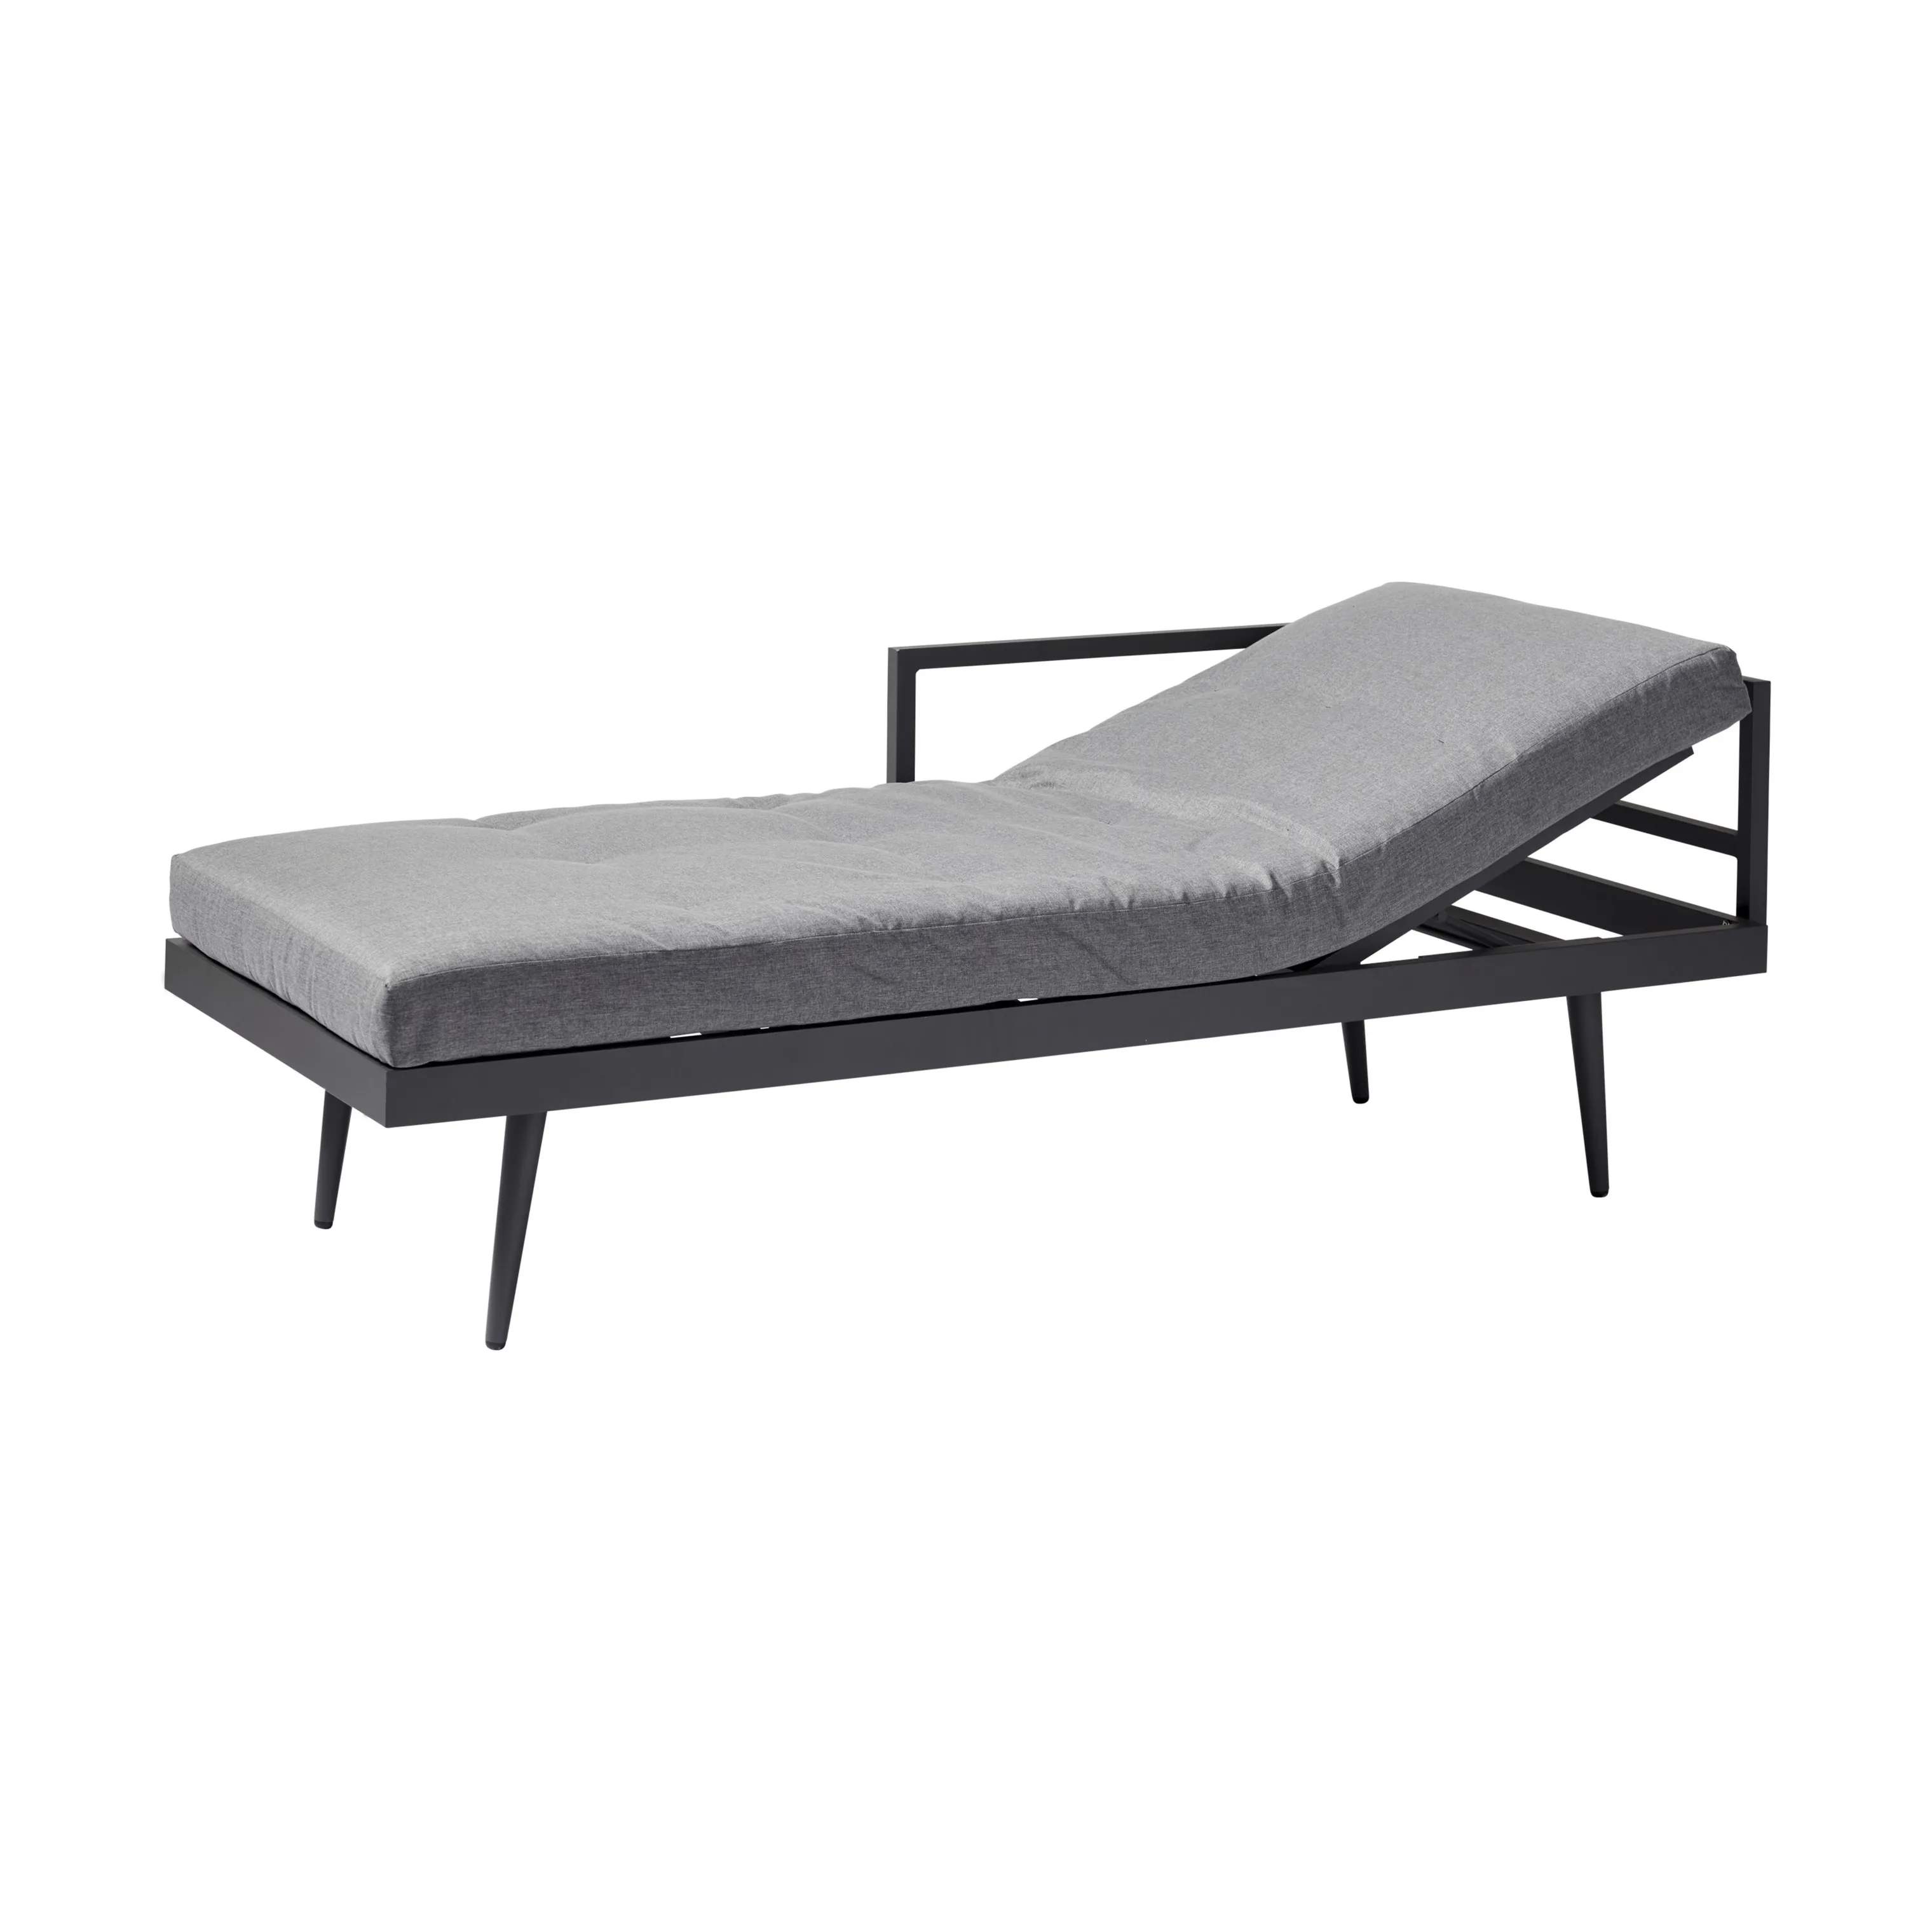 Rio Daybed, antracit, large